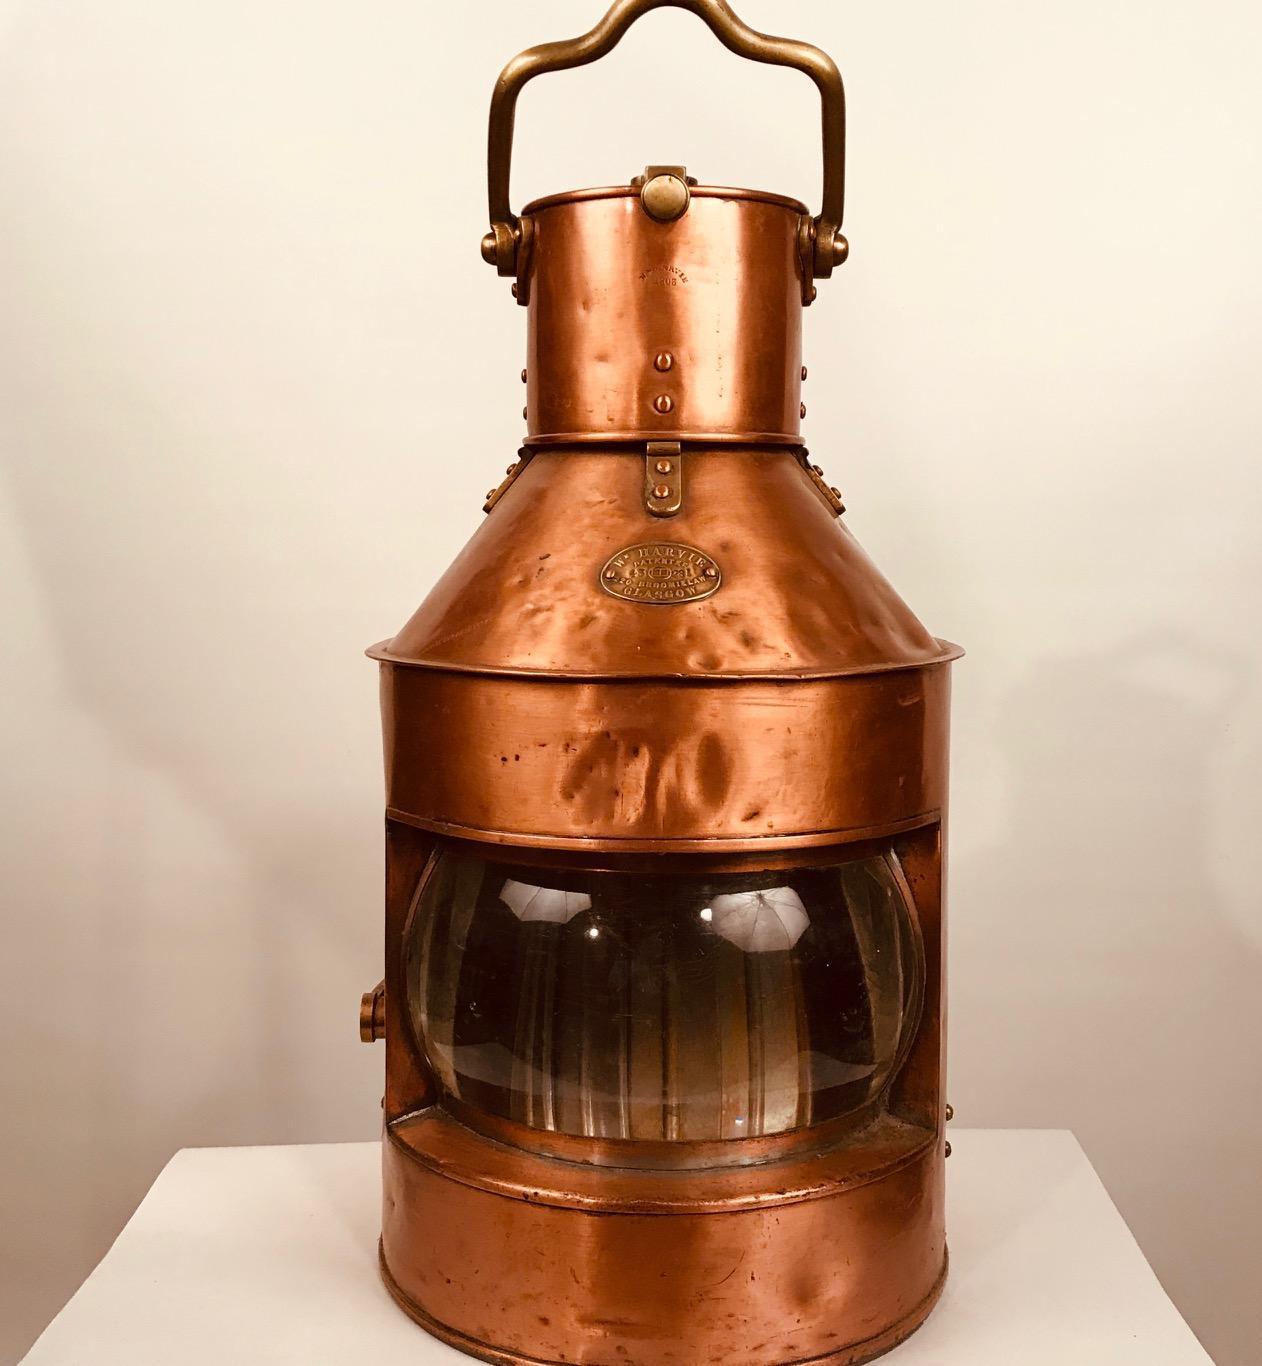 A copper and brass signal light by William Harvie & Co Ltd, Glasgow, numbered 6620, constructed in copper and brass with clear bulls eye lens, shutter handle, the chimney stamped Wm Harvie 1903 and brass plaque to front reading W HARVIE patentee